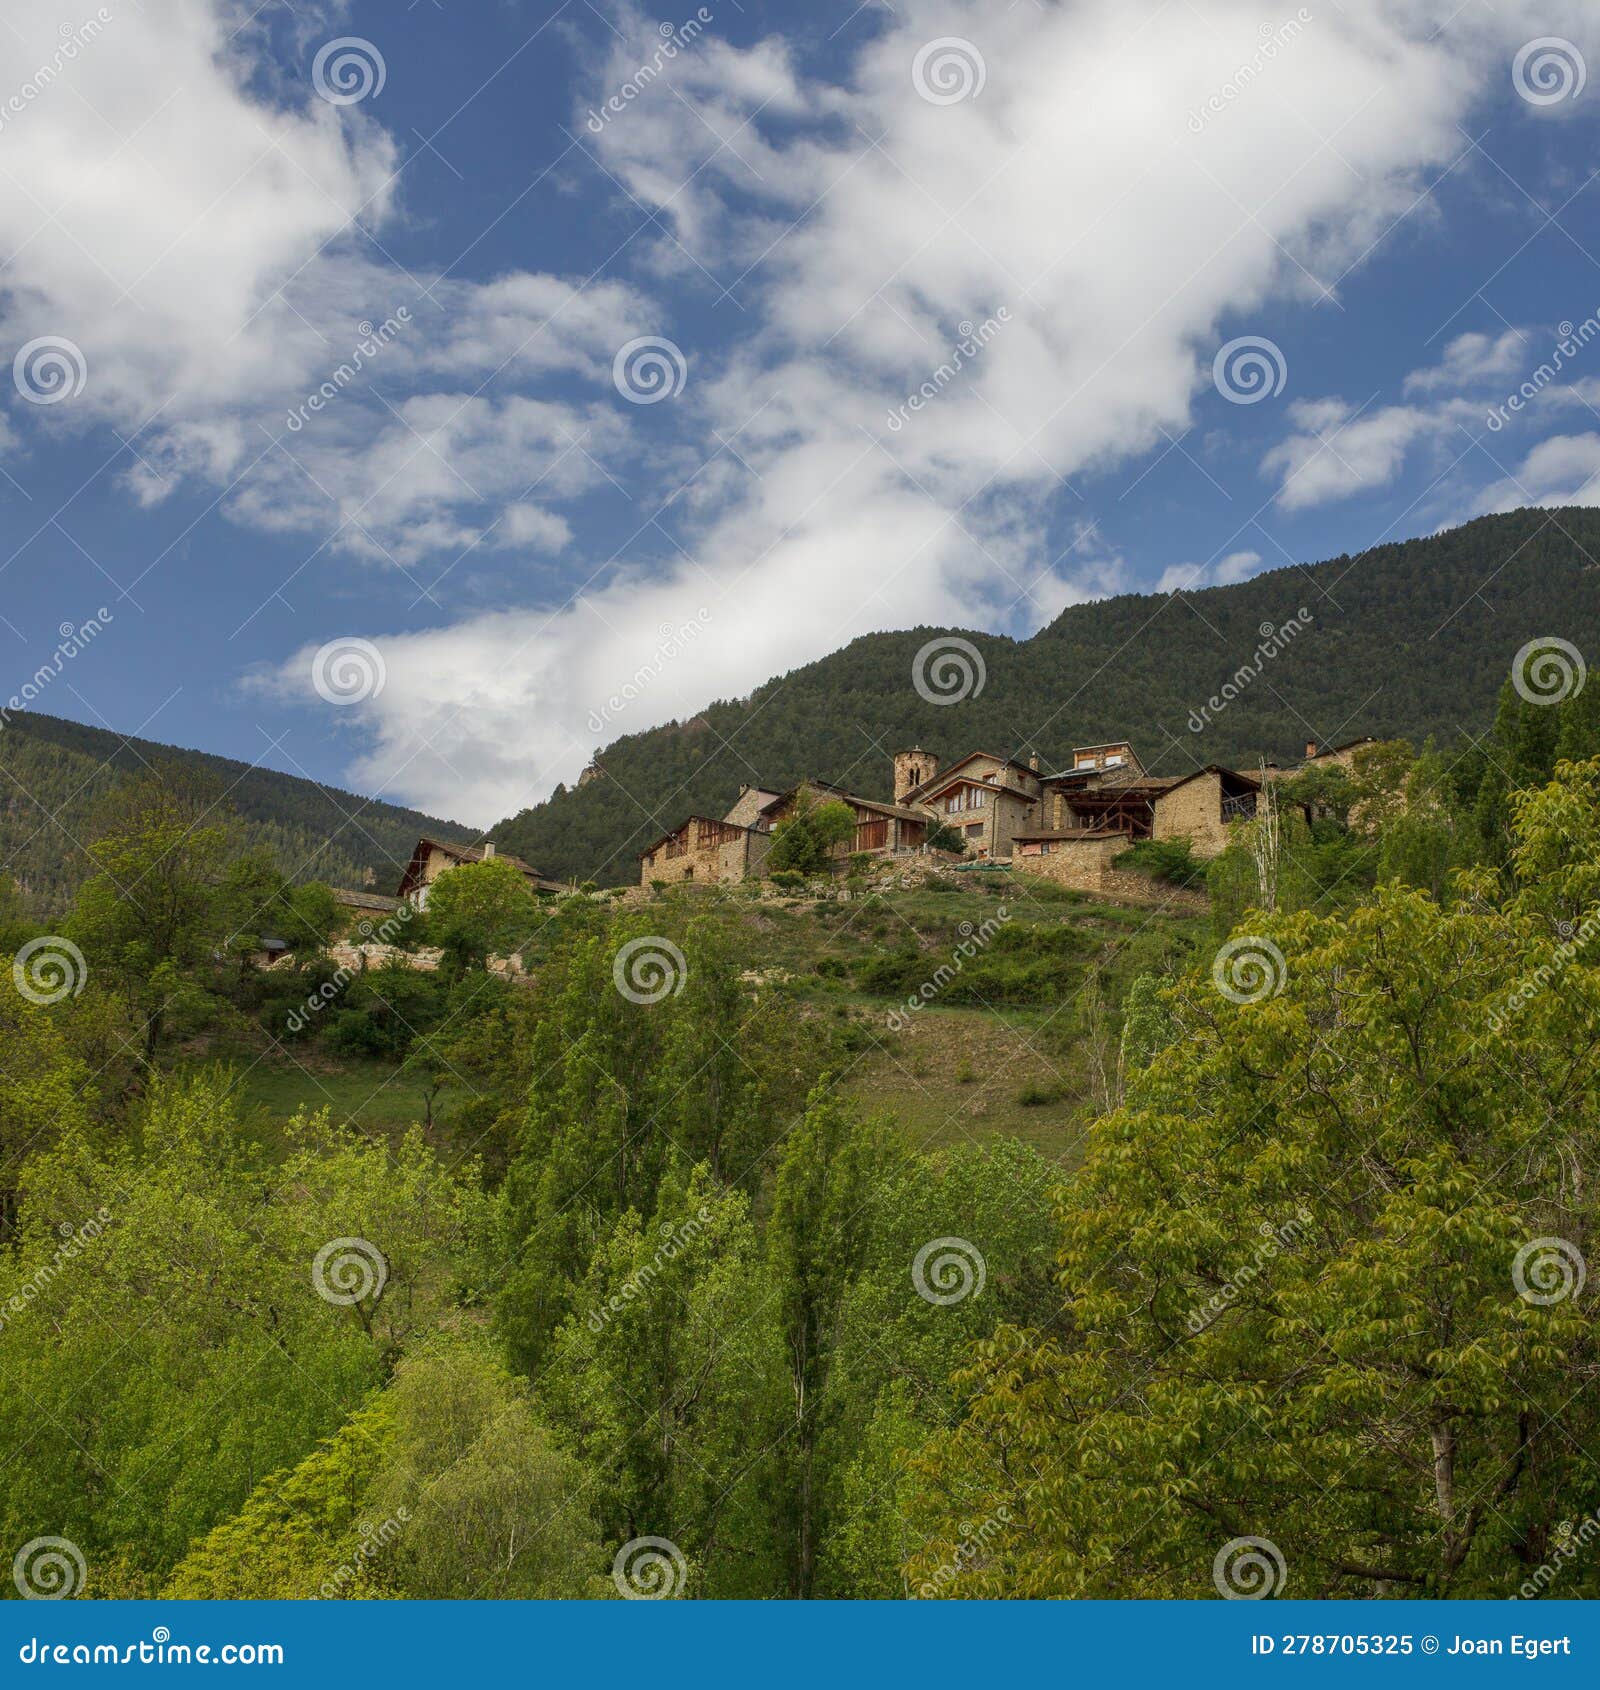 the village of ars in the national park of alt pirineu in the catalan pyrenees